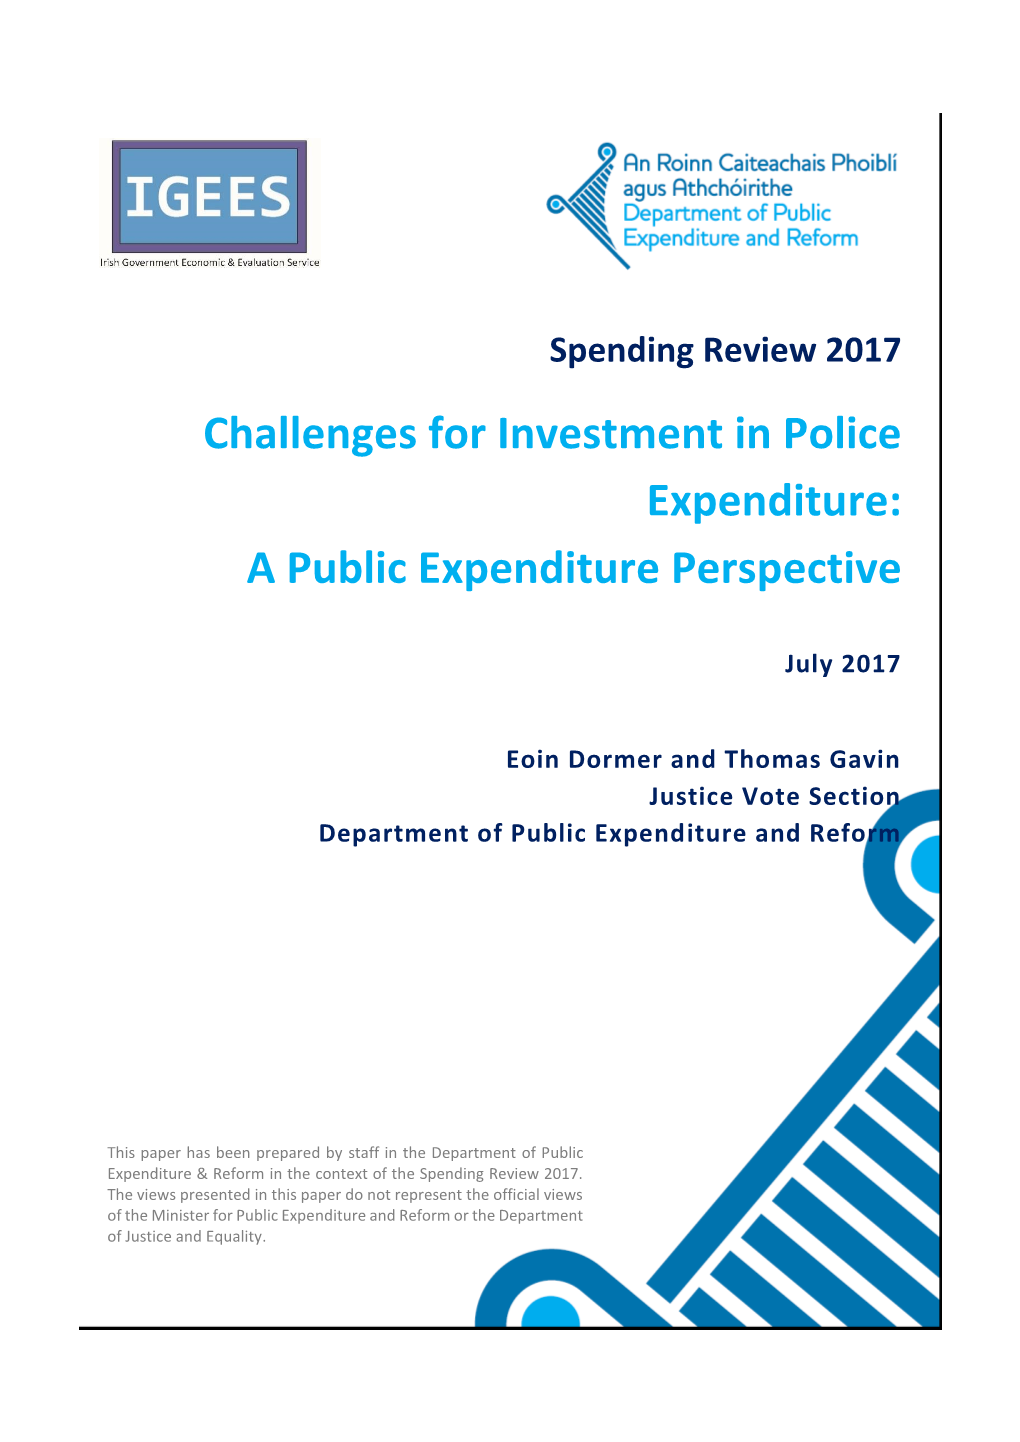 Challenges for Investment in Police Expenditure: a Public Expenditure Perspective